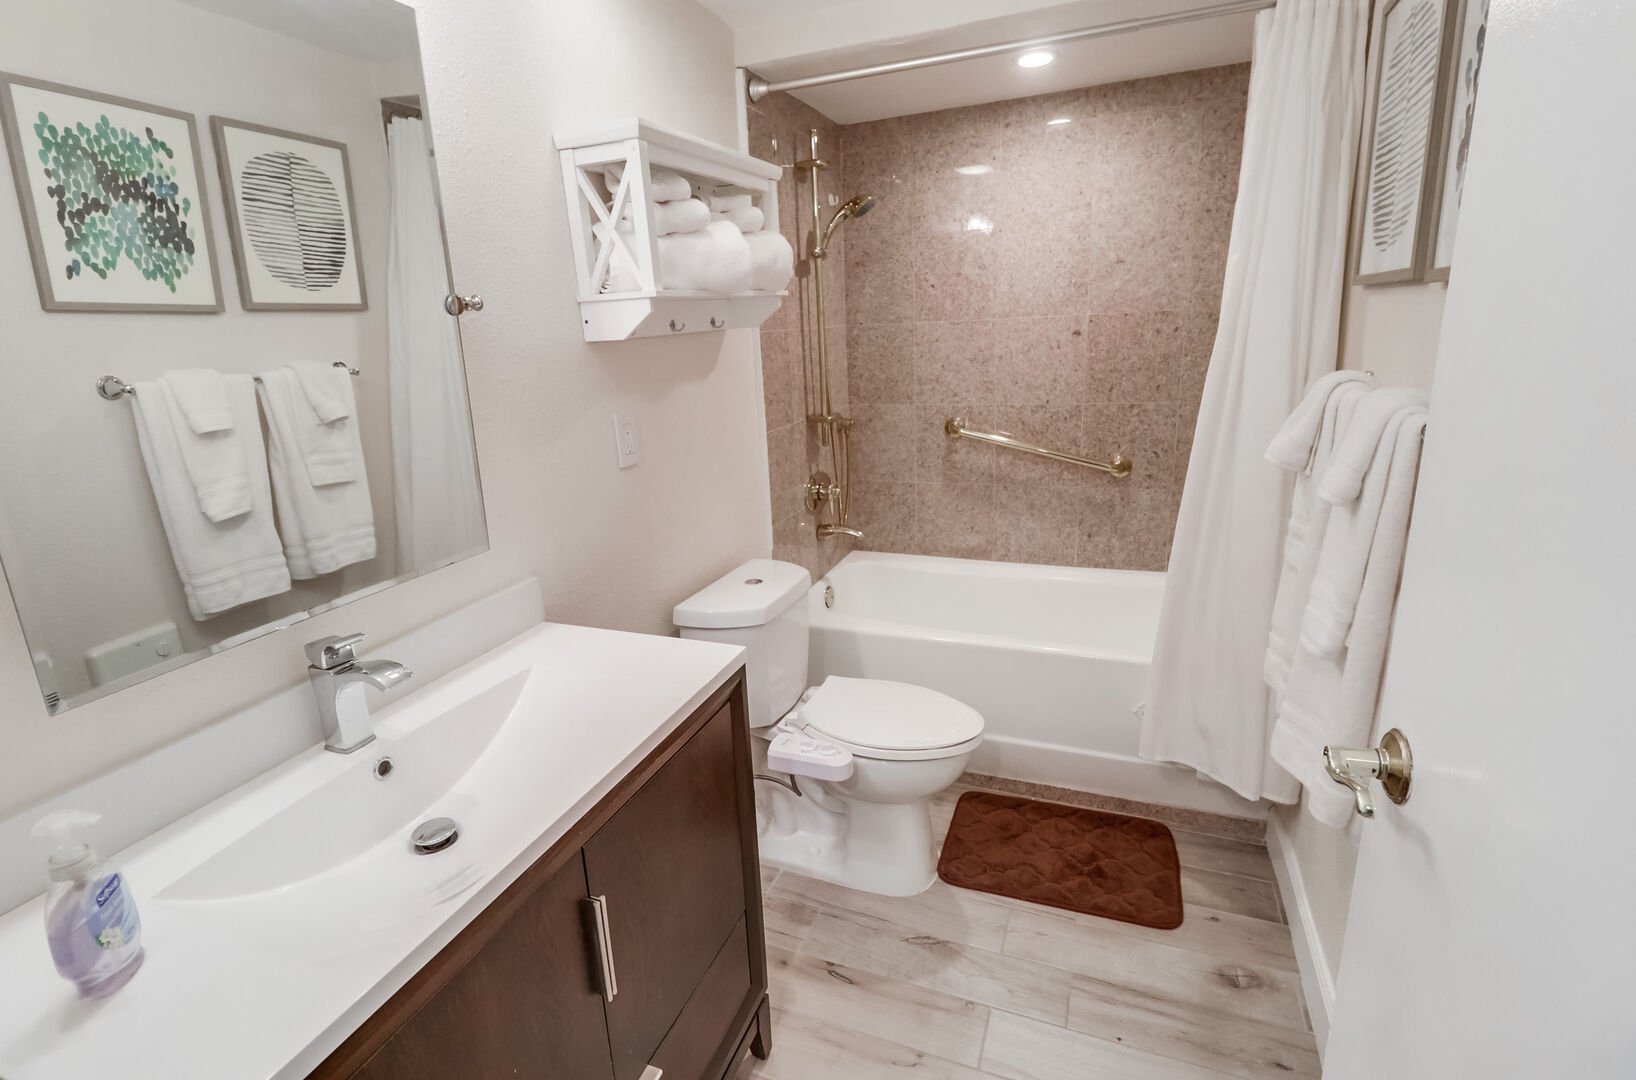 Full bathroom with shower/tub combo, vanity, ample storage space, toilet and bidet